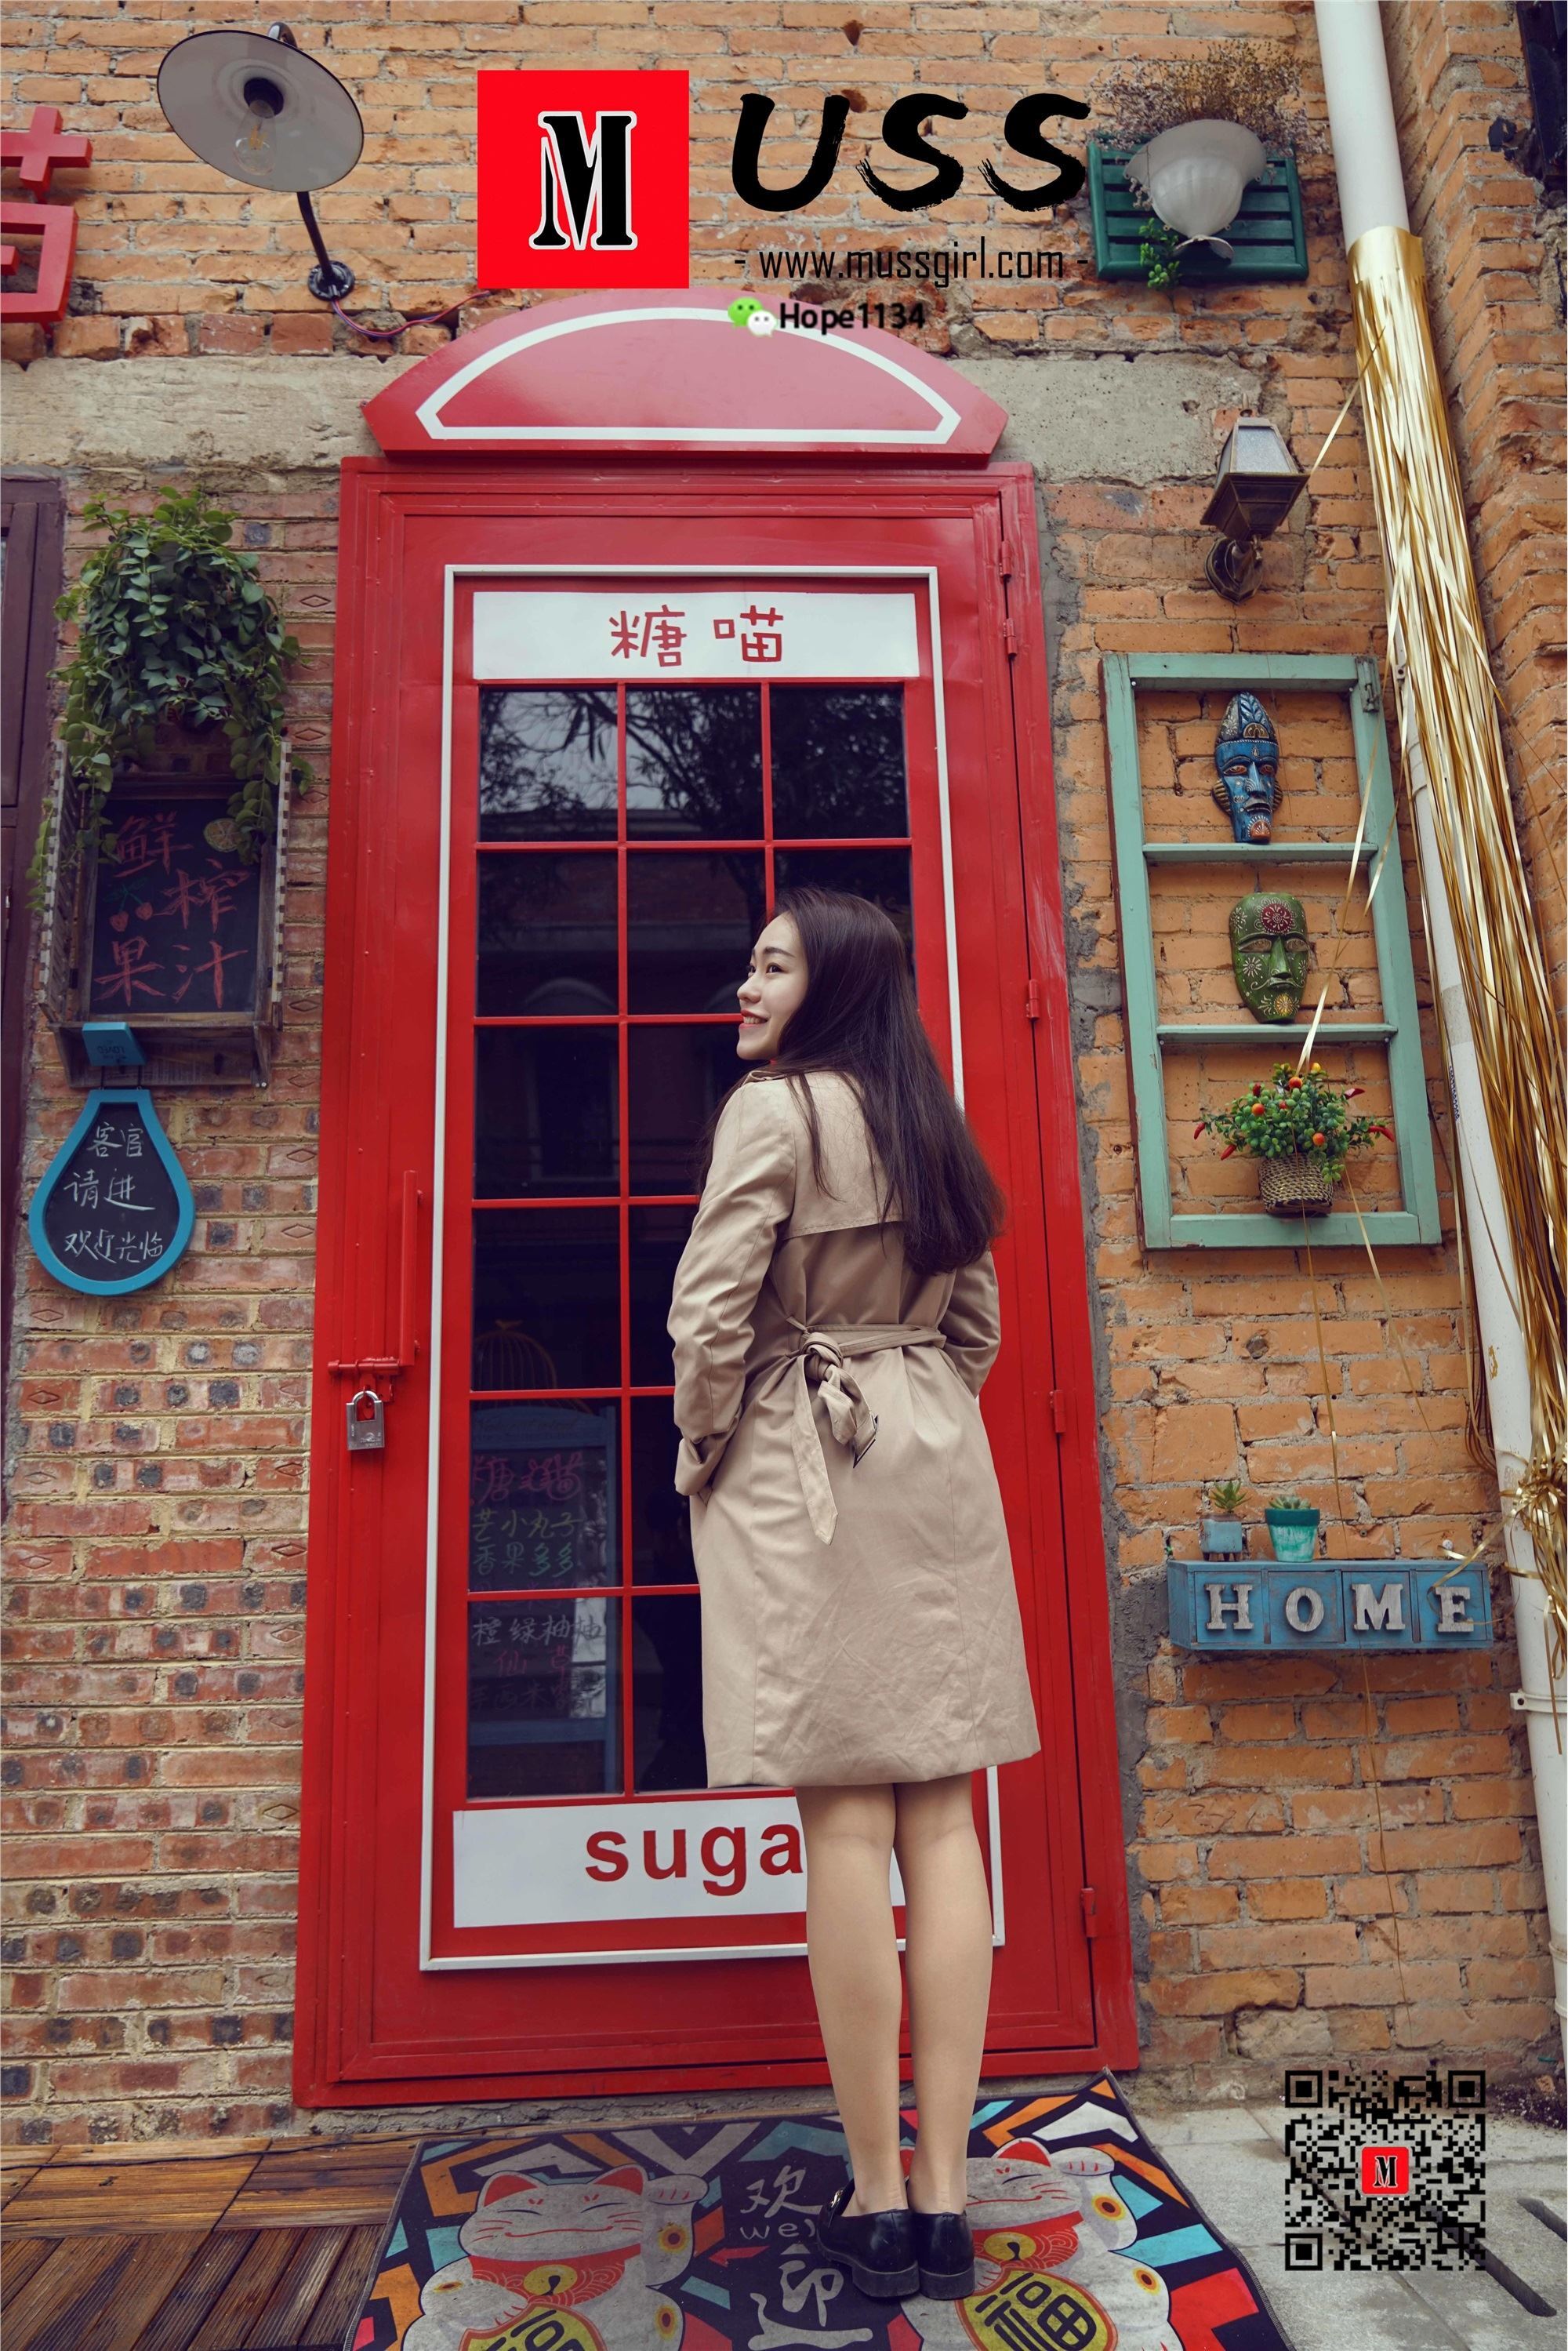 Mussgirl No.037 with her phone booth